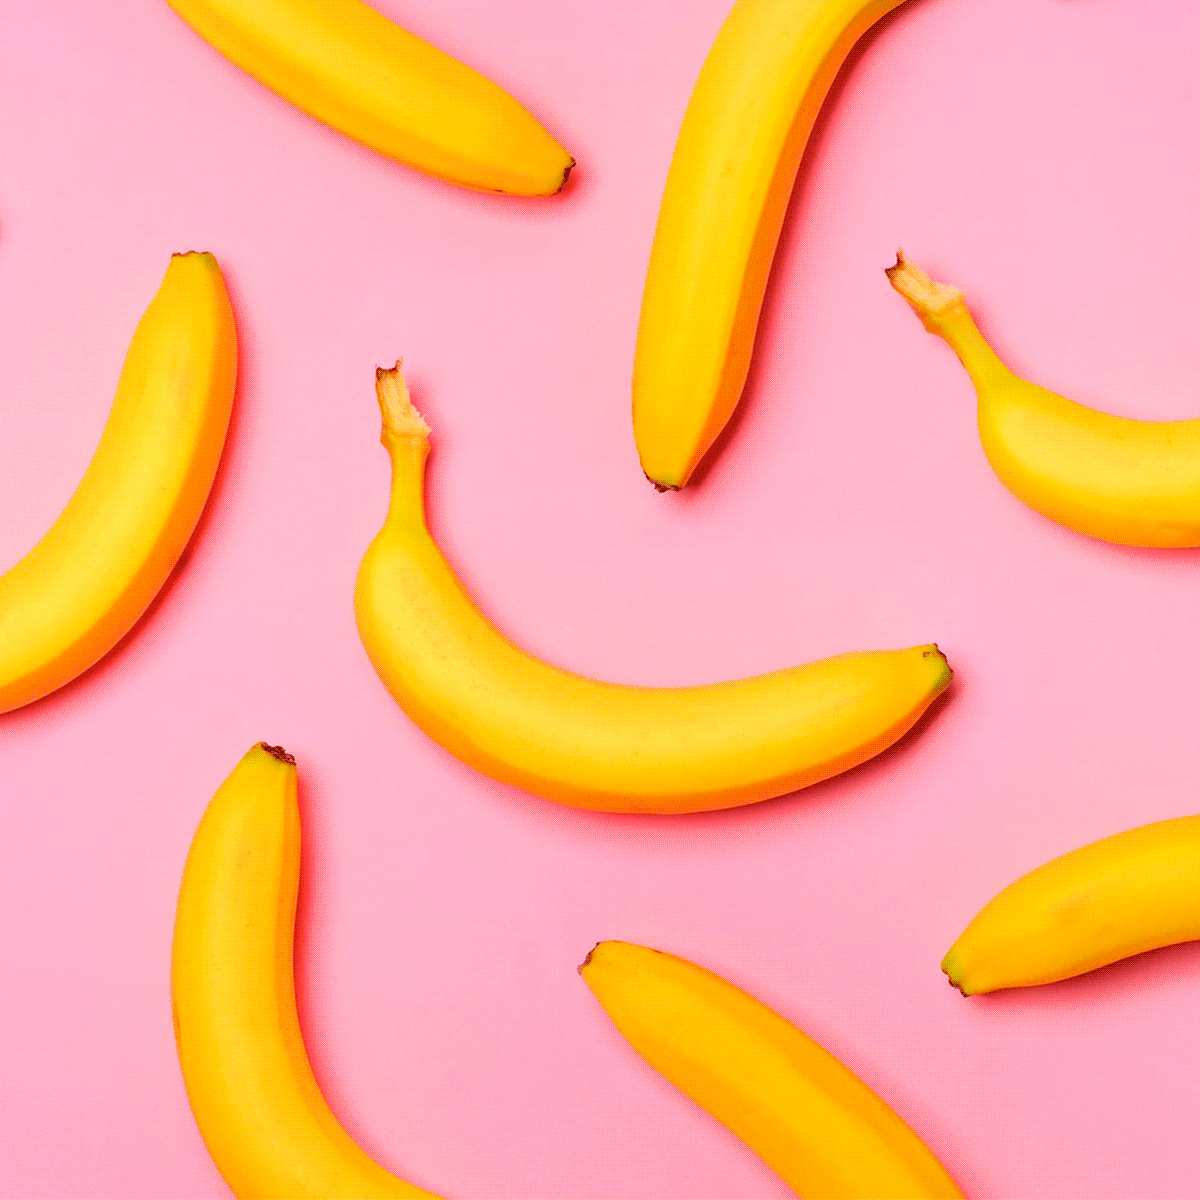 Banana moving back and forth on a pink background